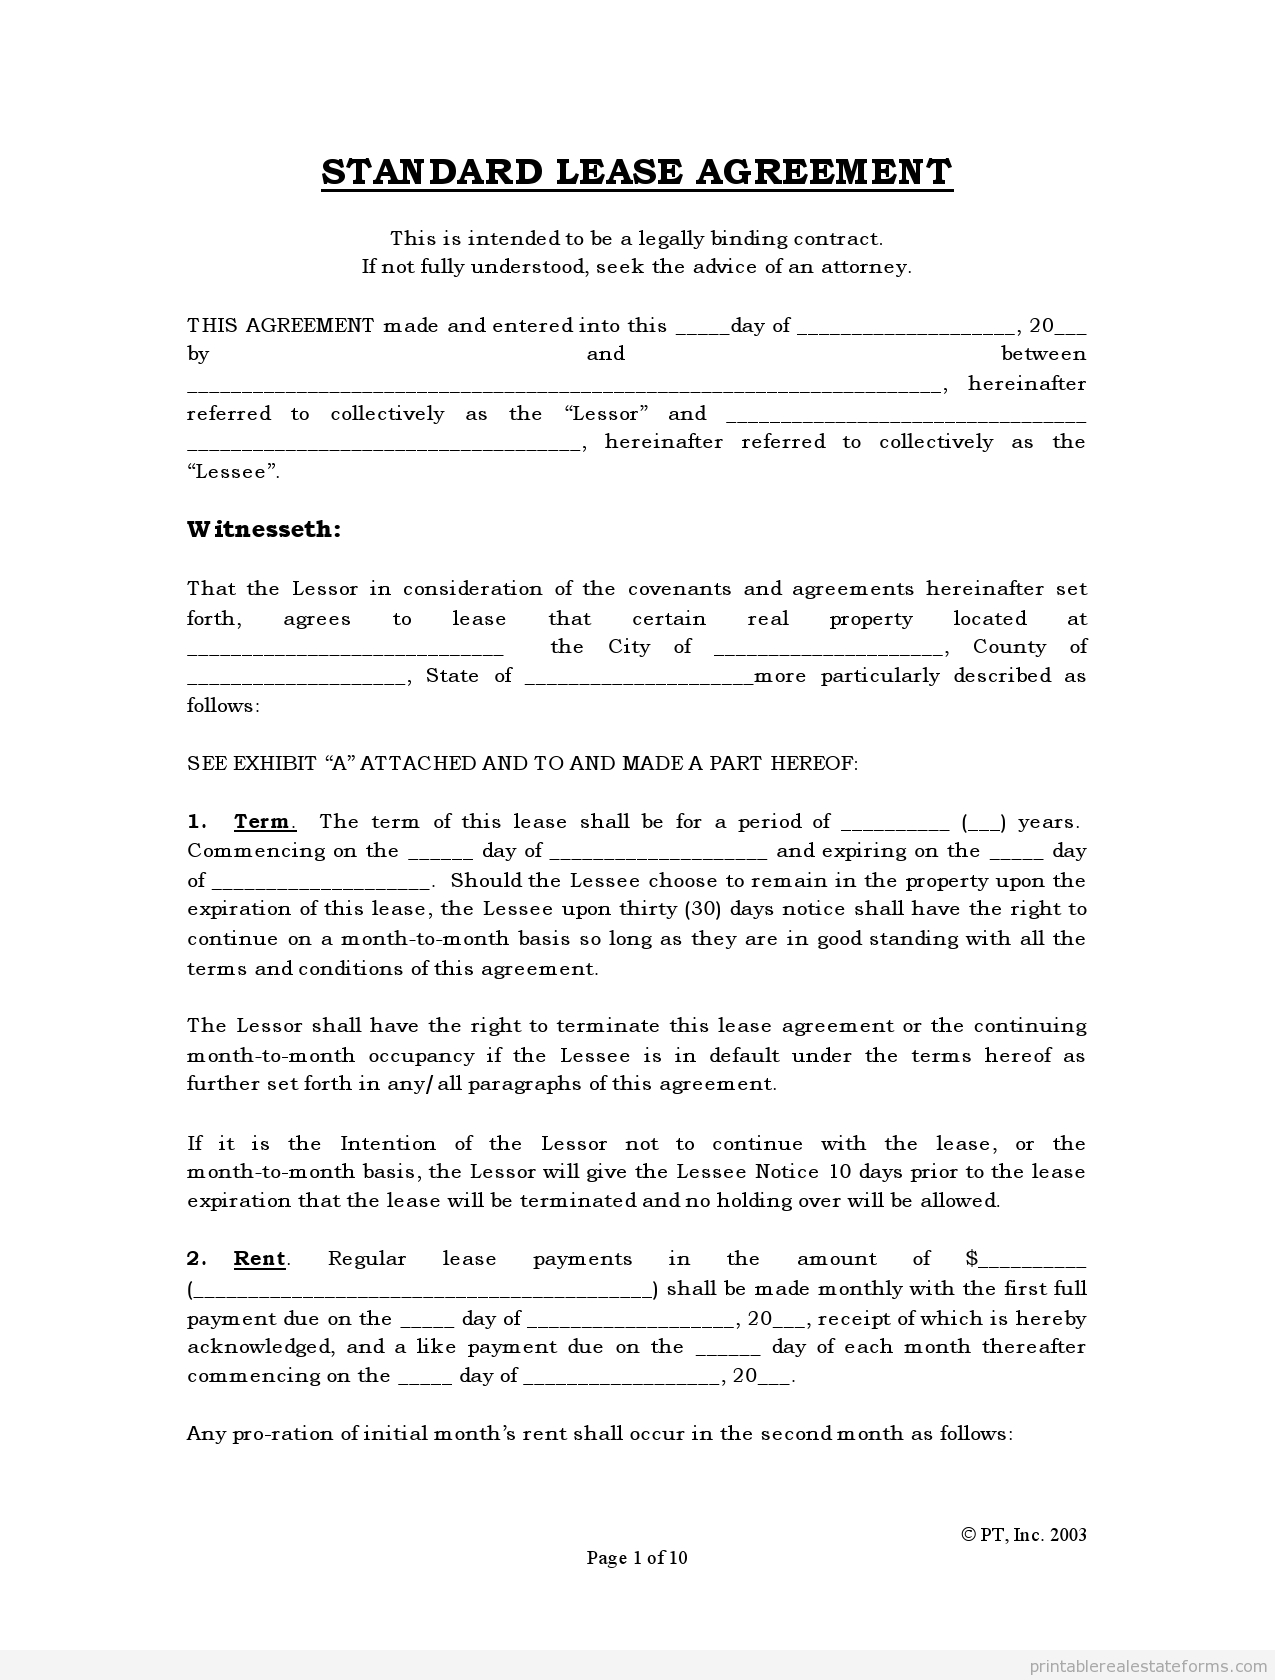 Free Rental Agreements To Print | Free Standard Lease Agreement Form - Free Printable Lease